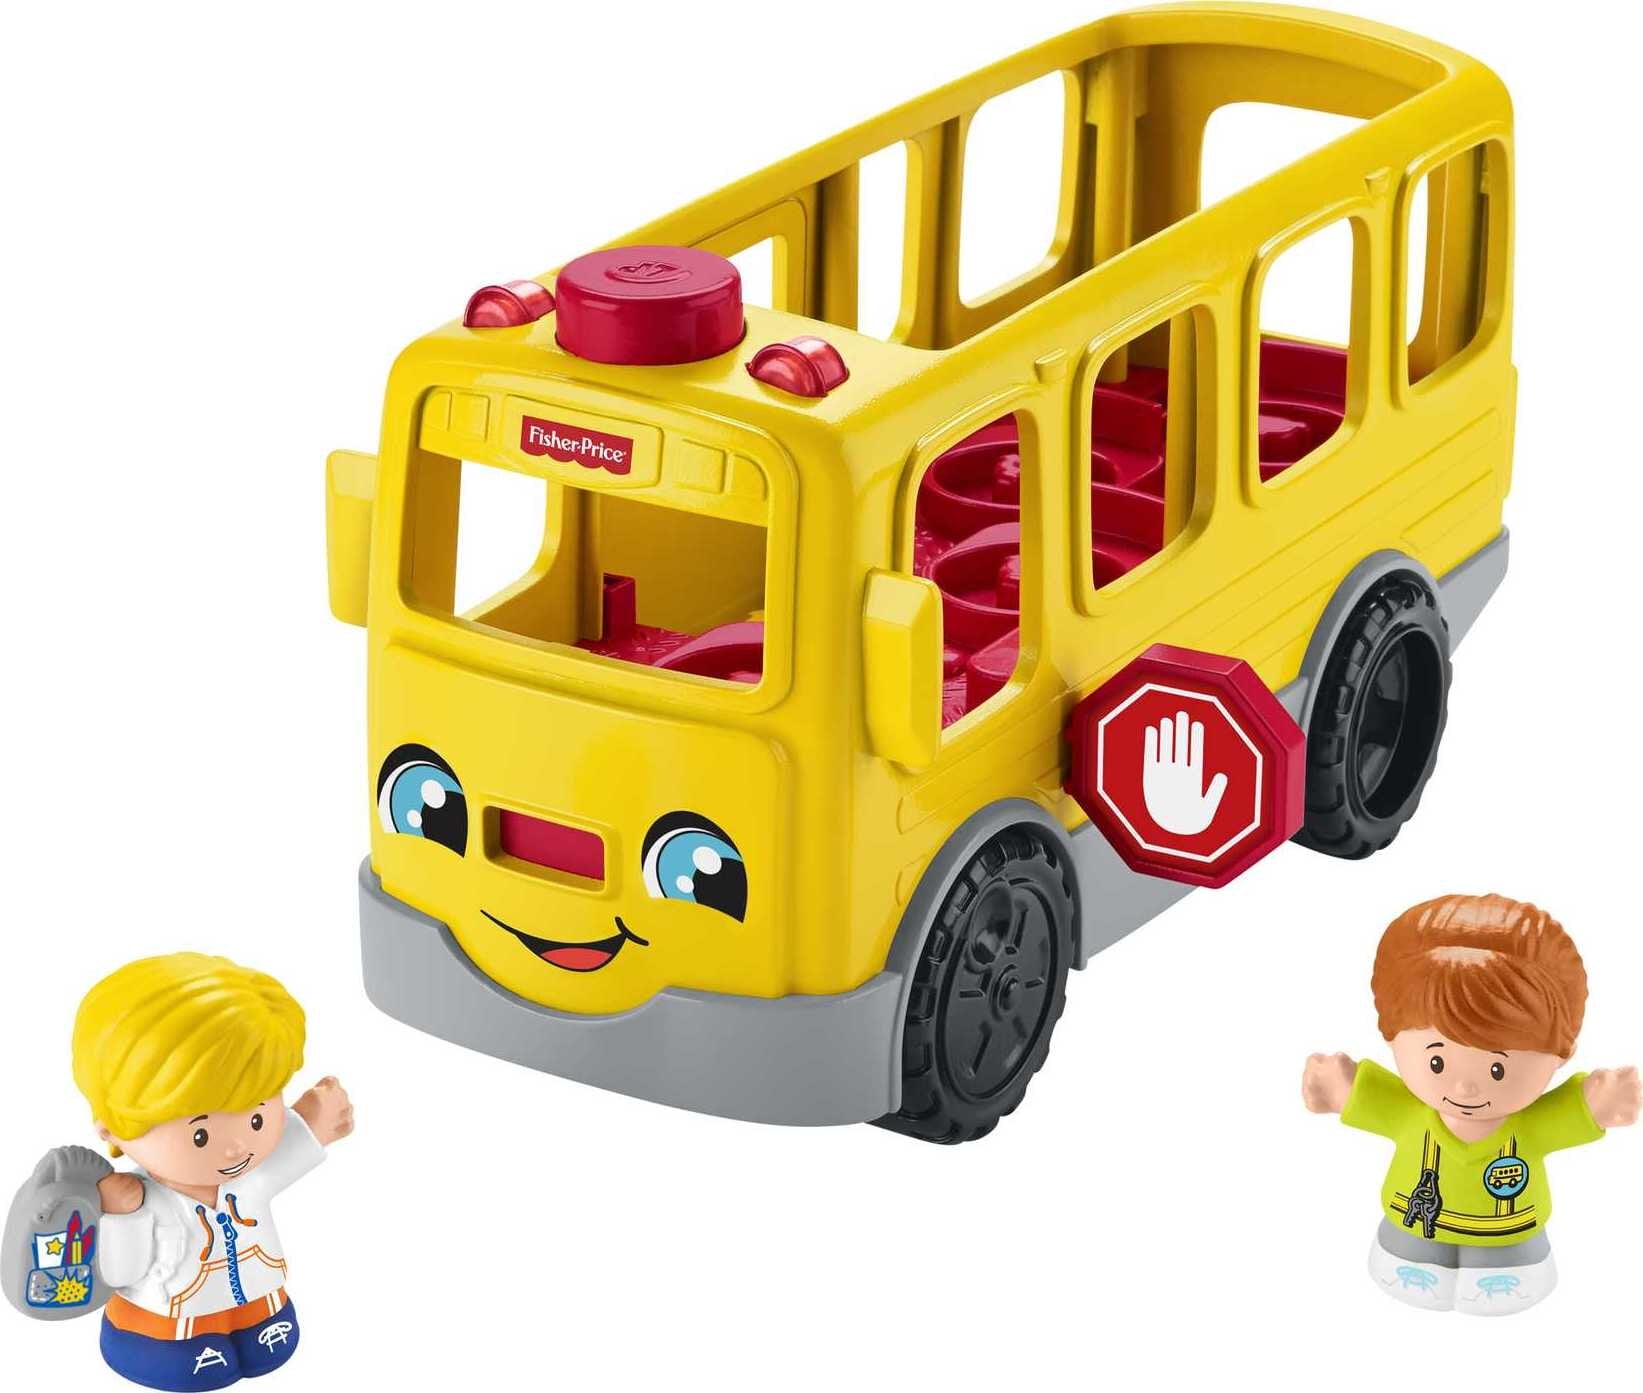 Fisher-Price Little People School Bus Toy with Lights and Sounds, 2 Figures, Toddler Toy